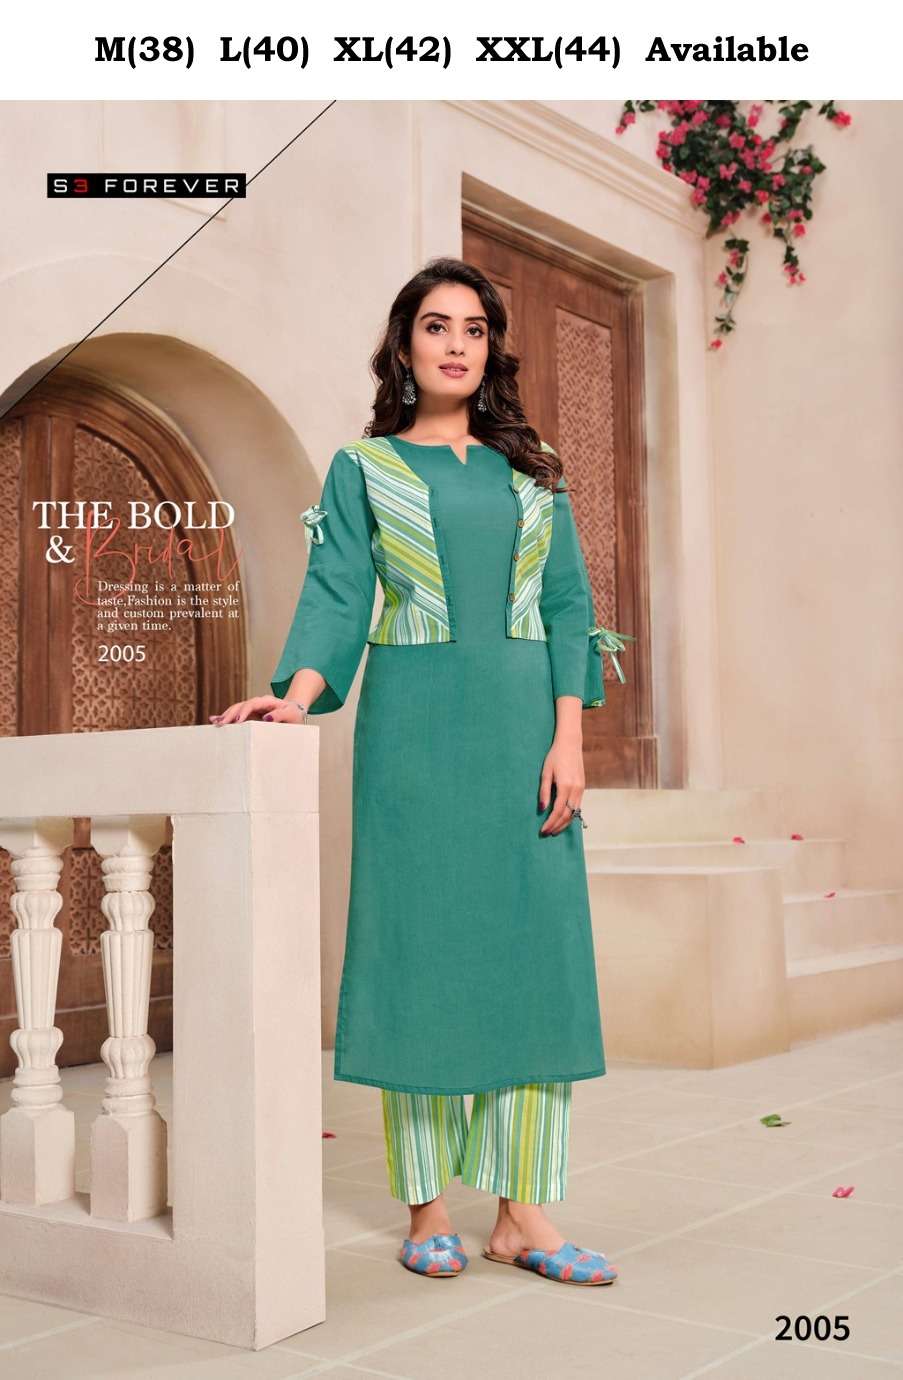  S3 Forever hello summer designer Cotton Based Fabric Kurti with Attached Jacket + Pant